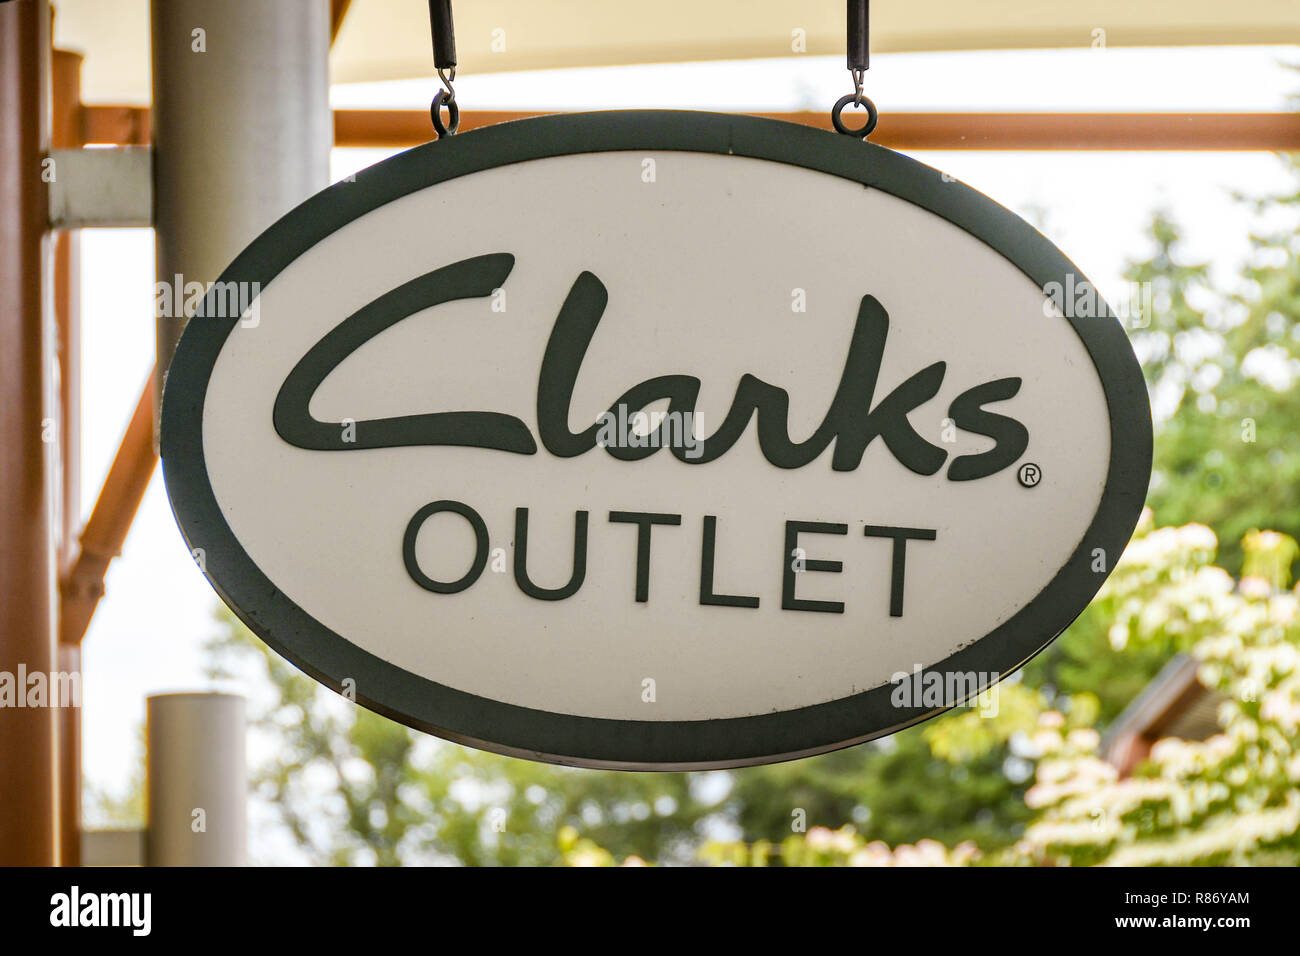 clarks shoes outlet vancouver bc